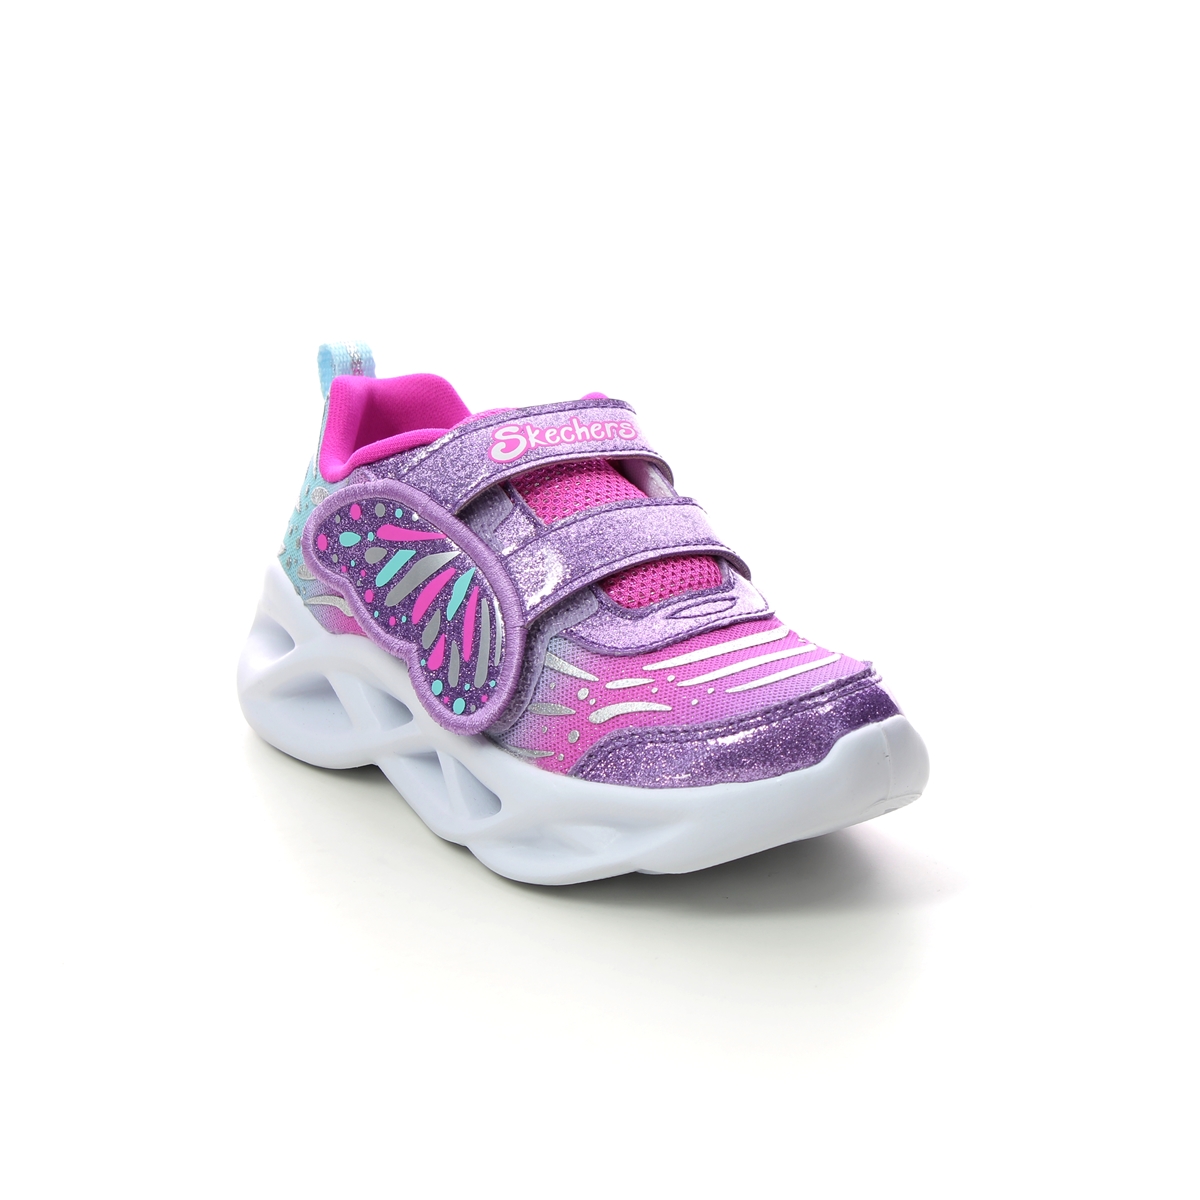 Skechers Twisty Brights Pink Kids Girls Trainers 302754N In Size 25 In Plain Pink For kids